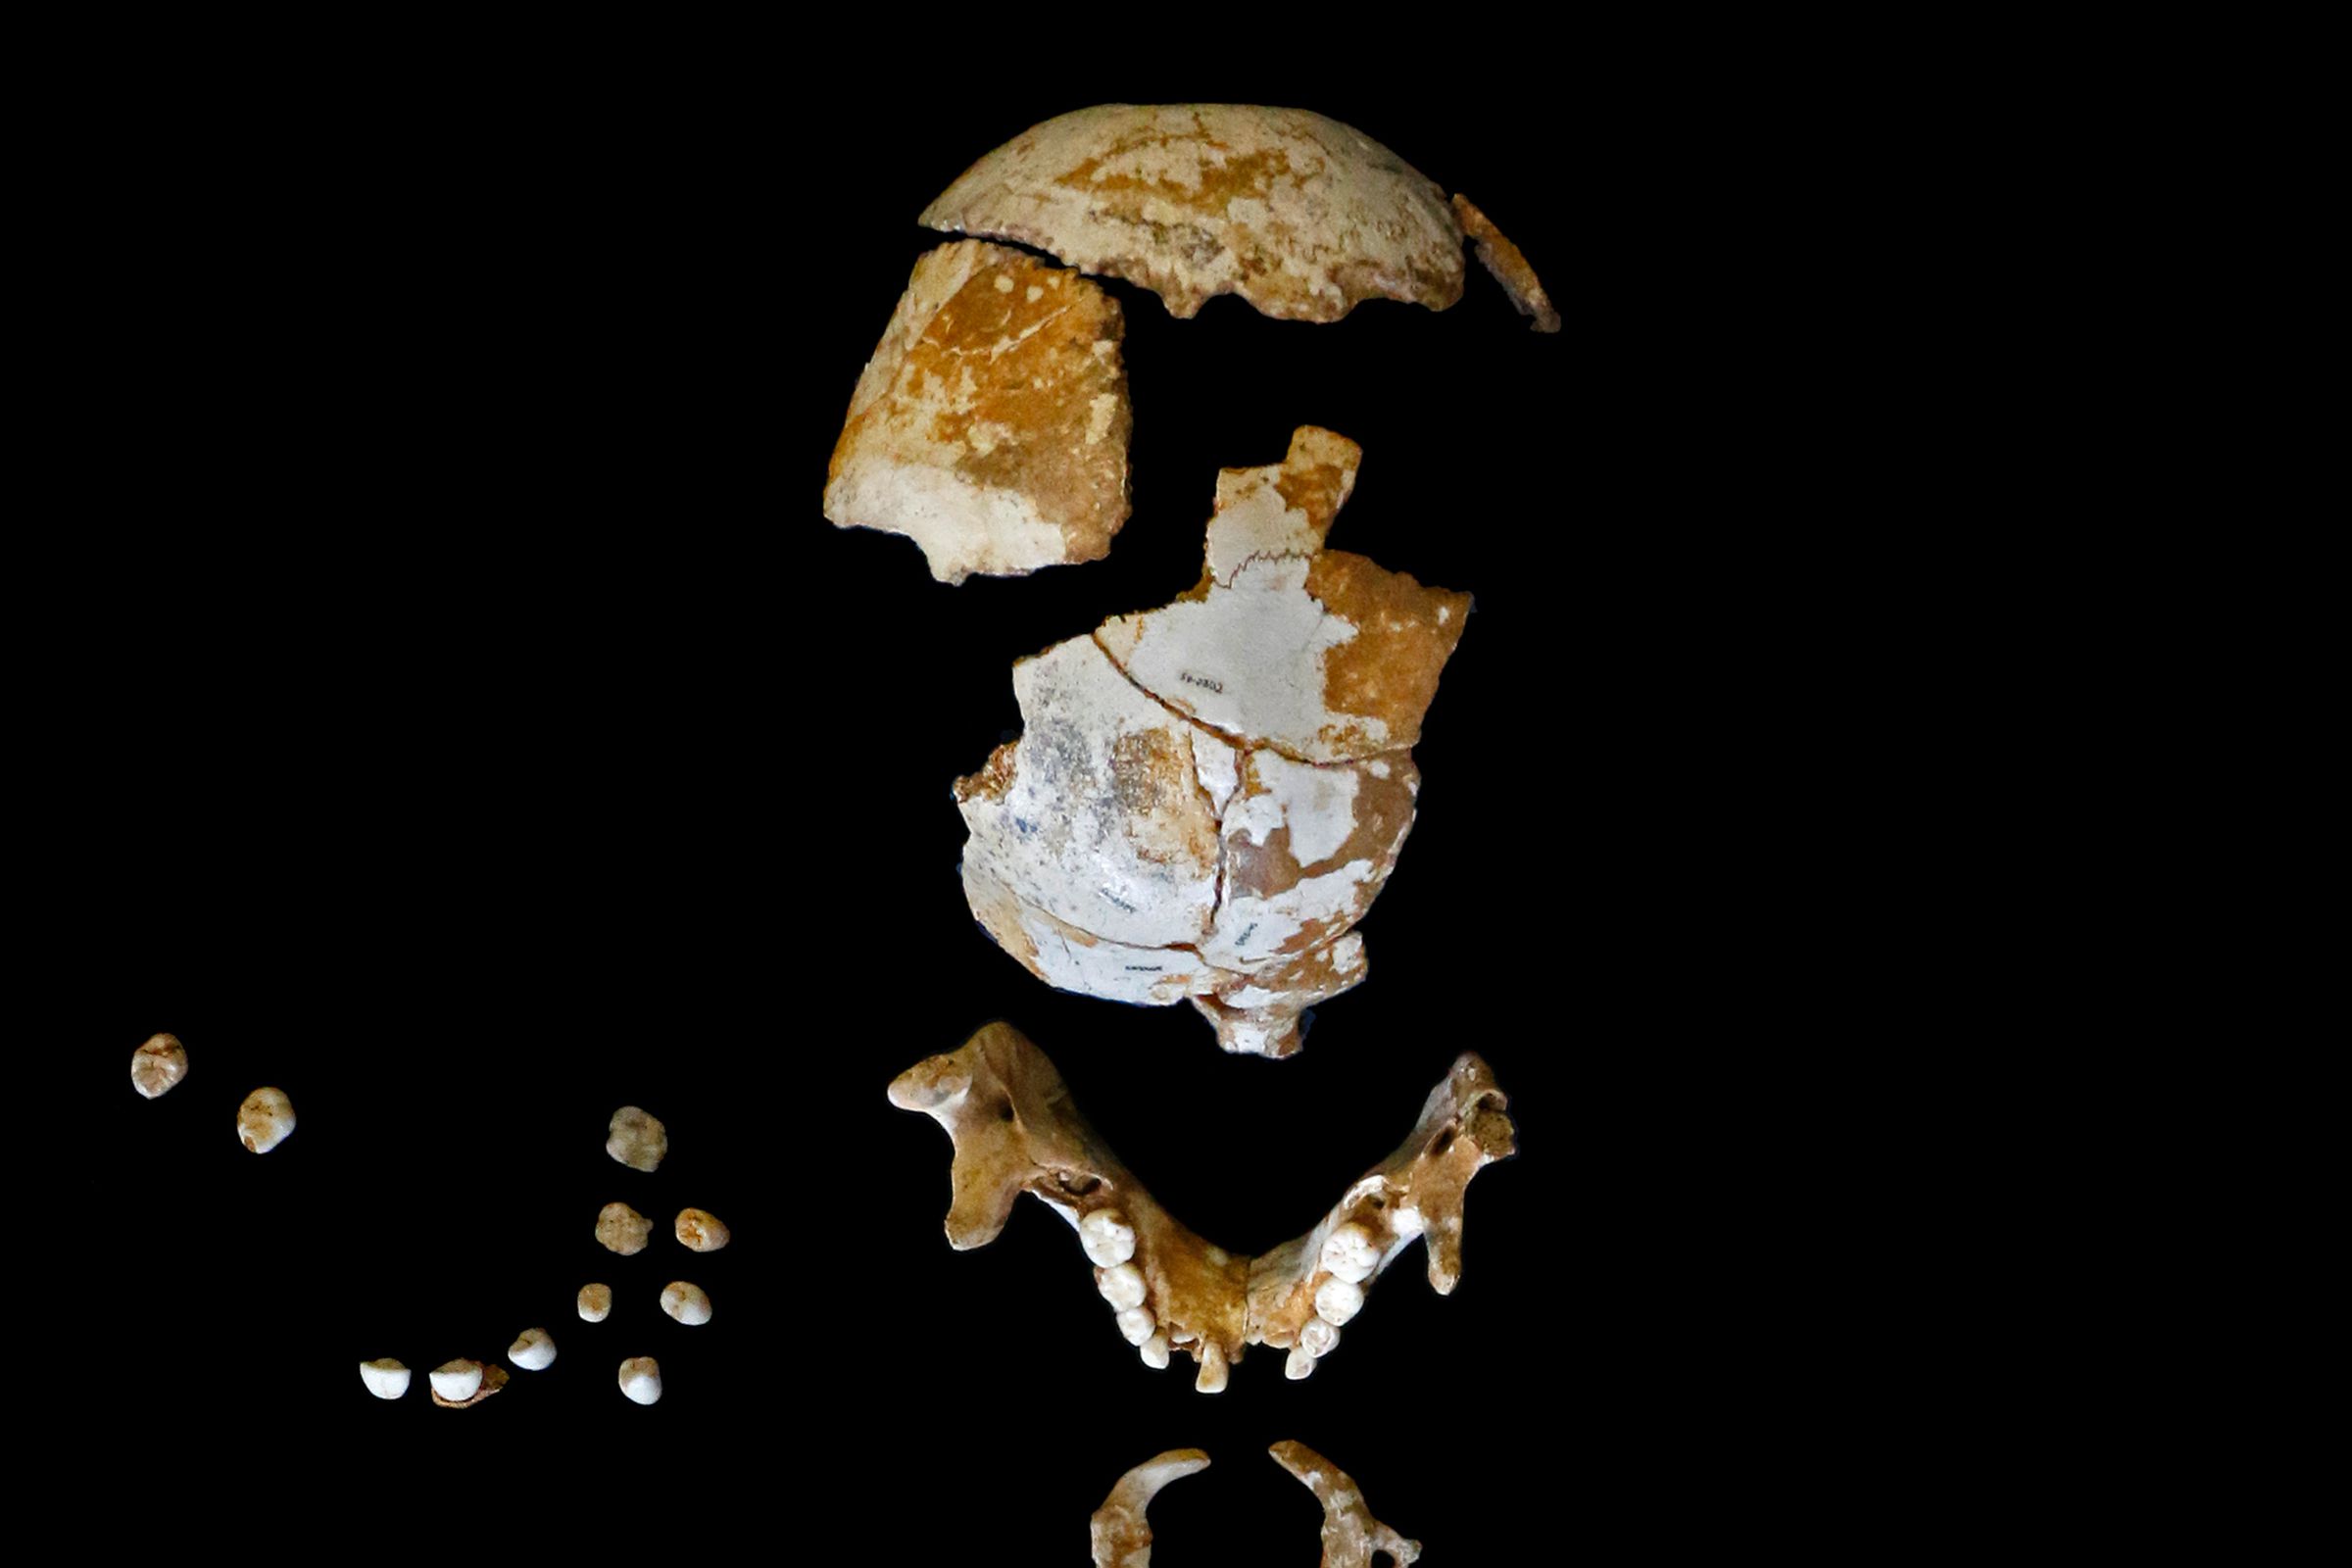 The skull of the Neanderthal boy analyzed in the study.